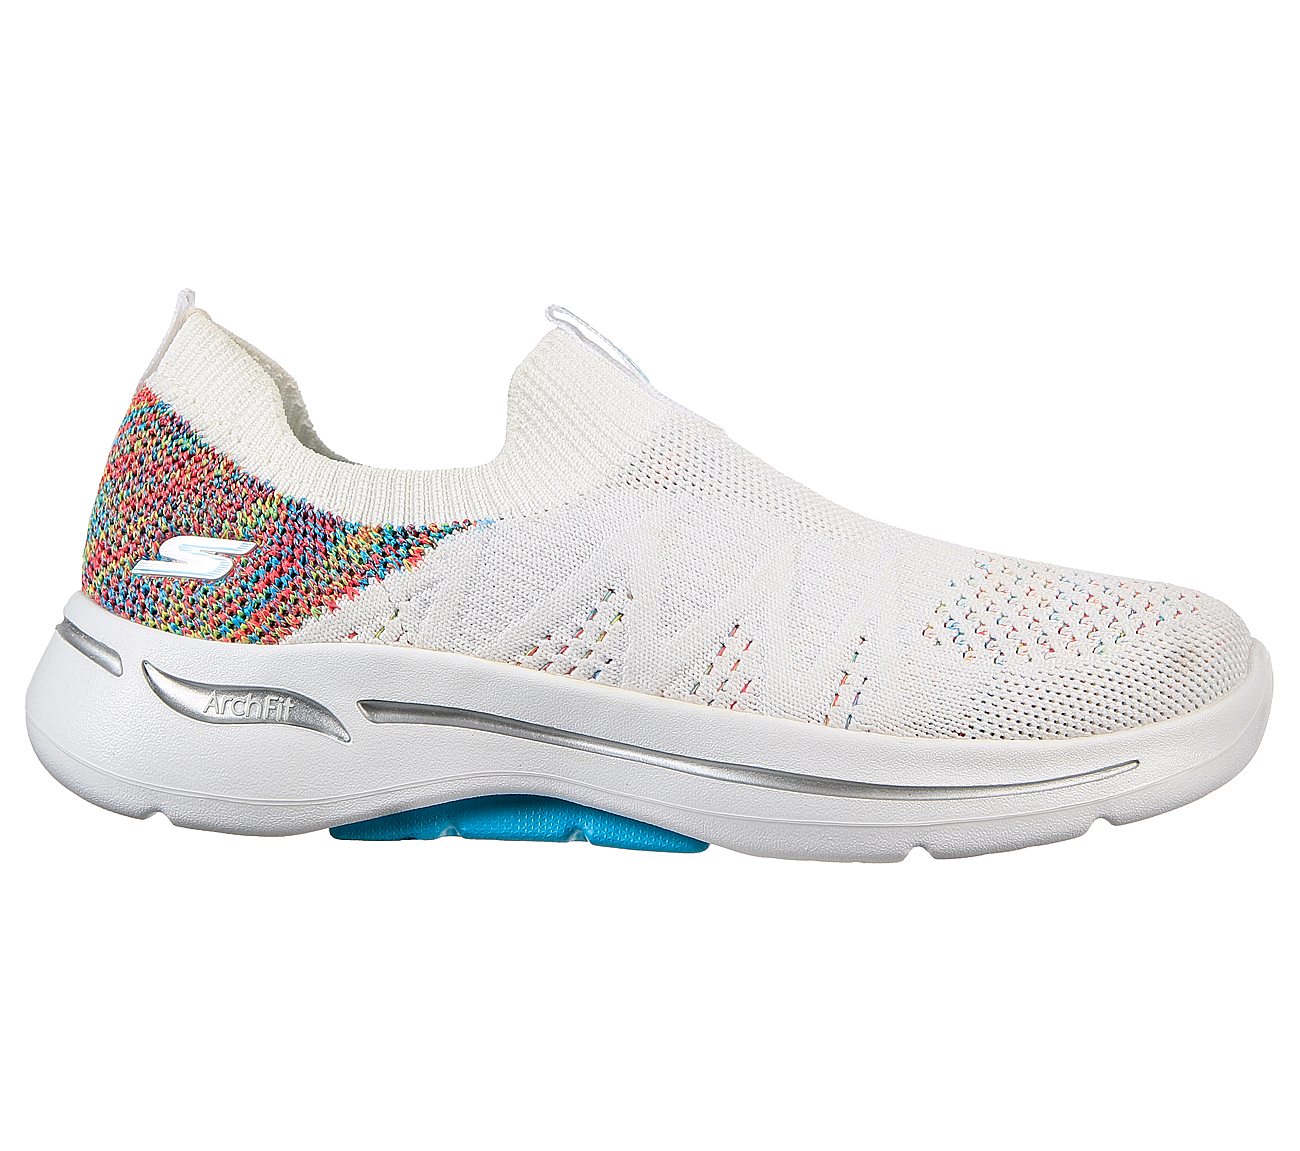 GO WALK ARCH FIT - FUN TIMES, WHITE/MULTI Footwear Lateral View